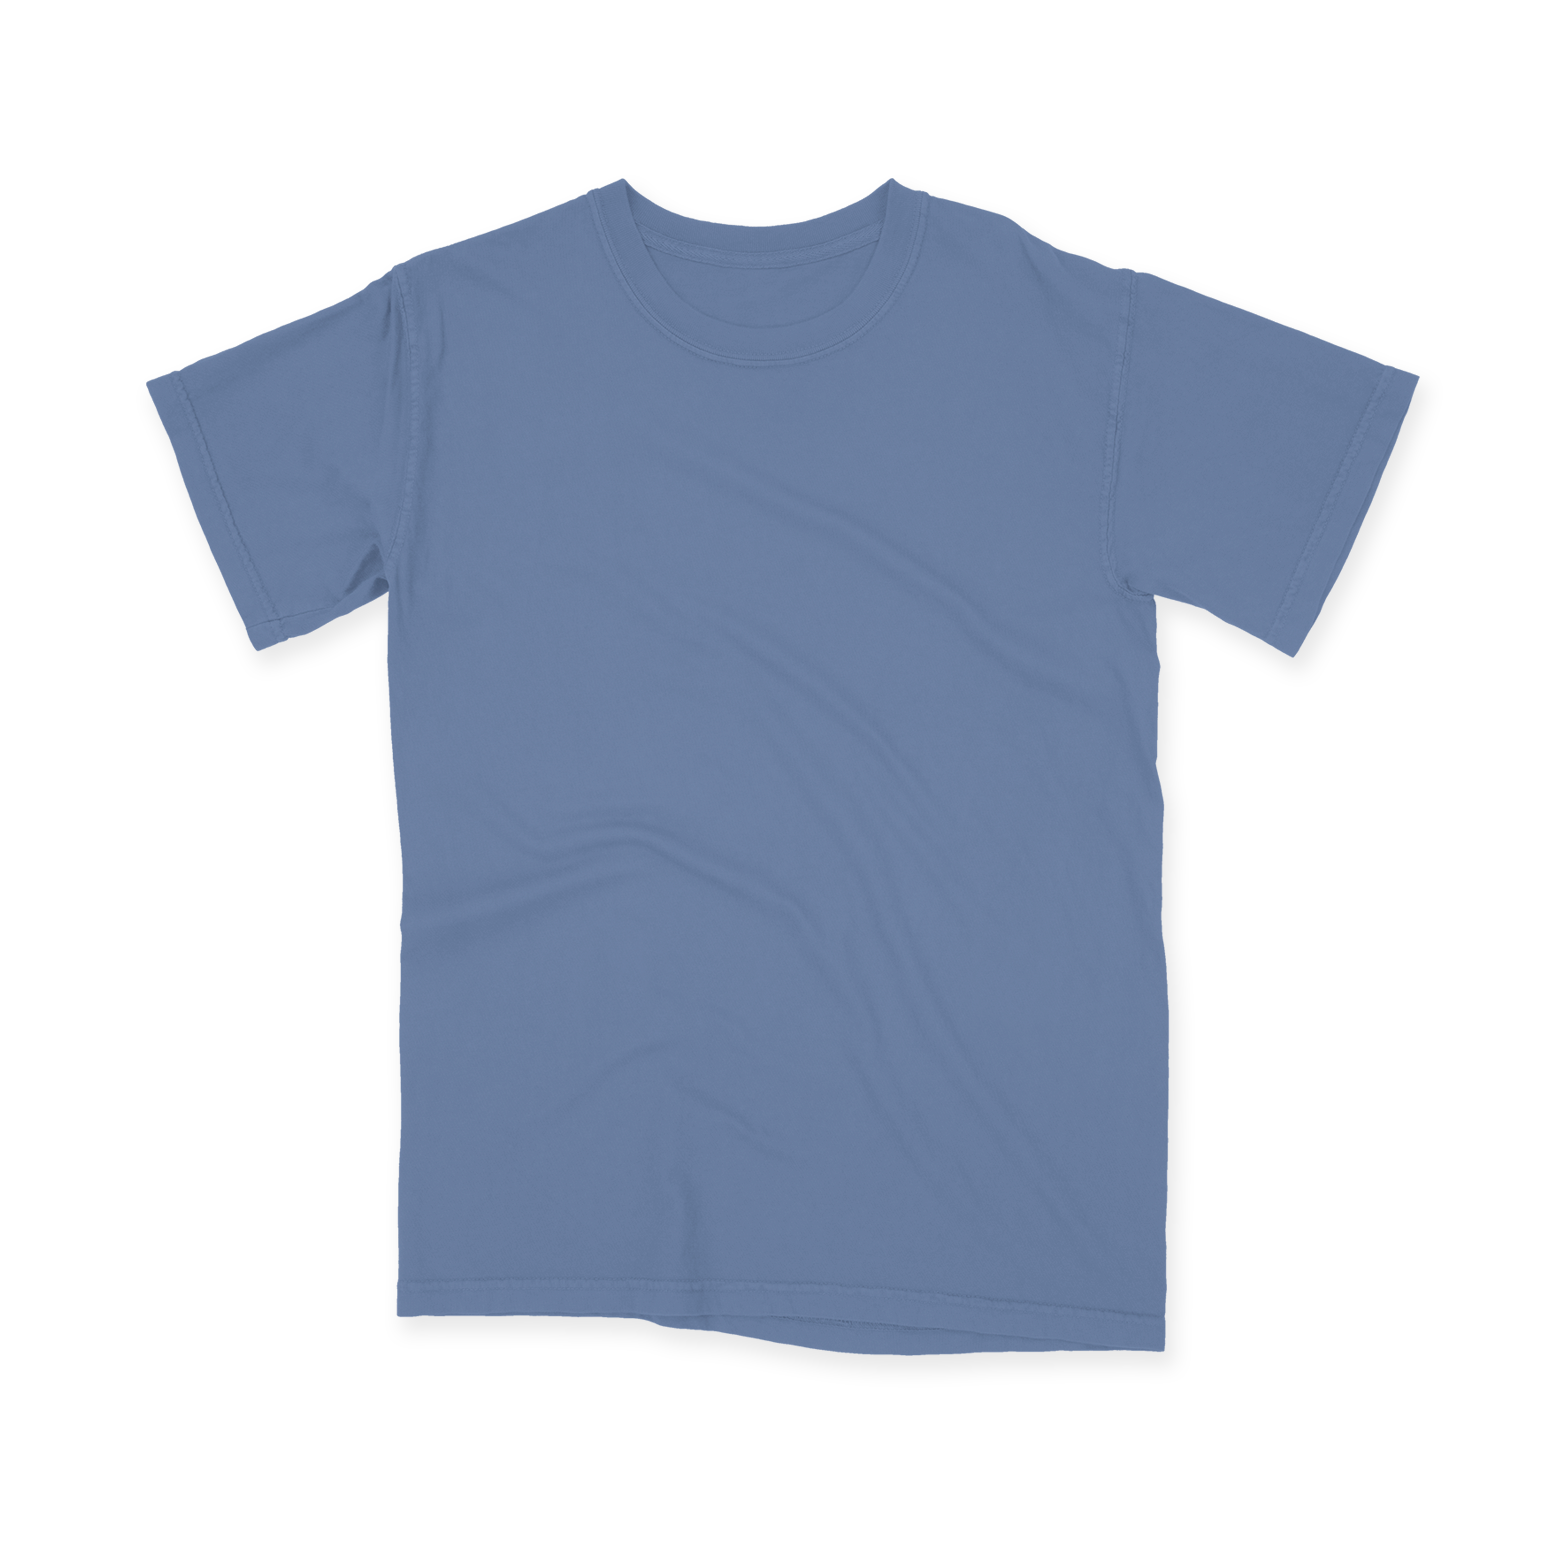 Shades - The Wall Tee | Comfort colors tee, Tees, Comfort colors